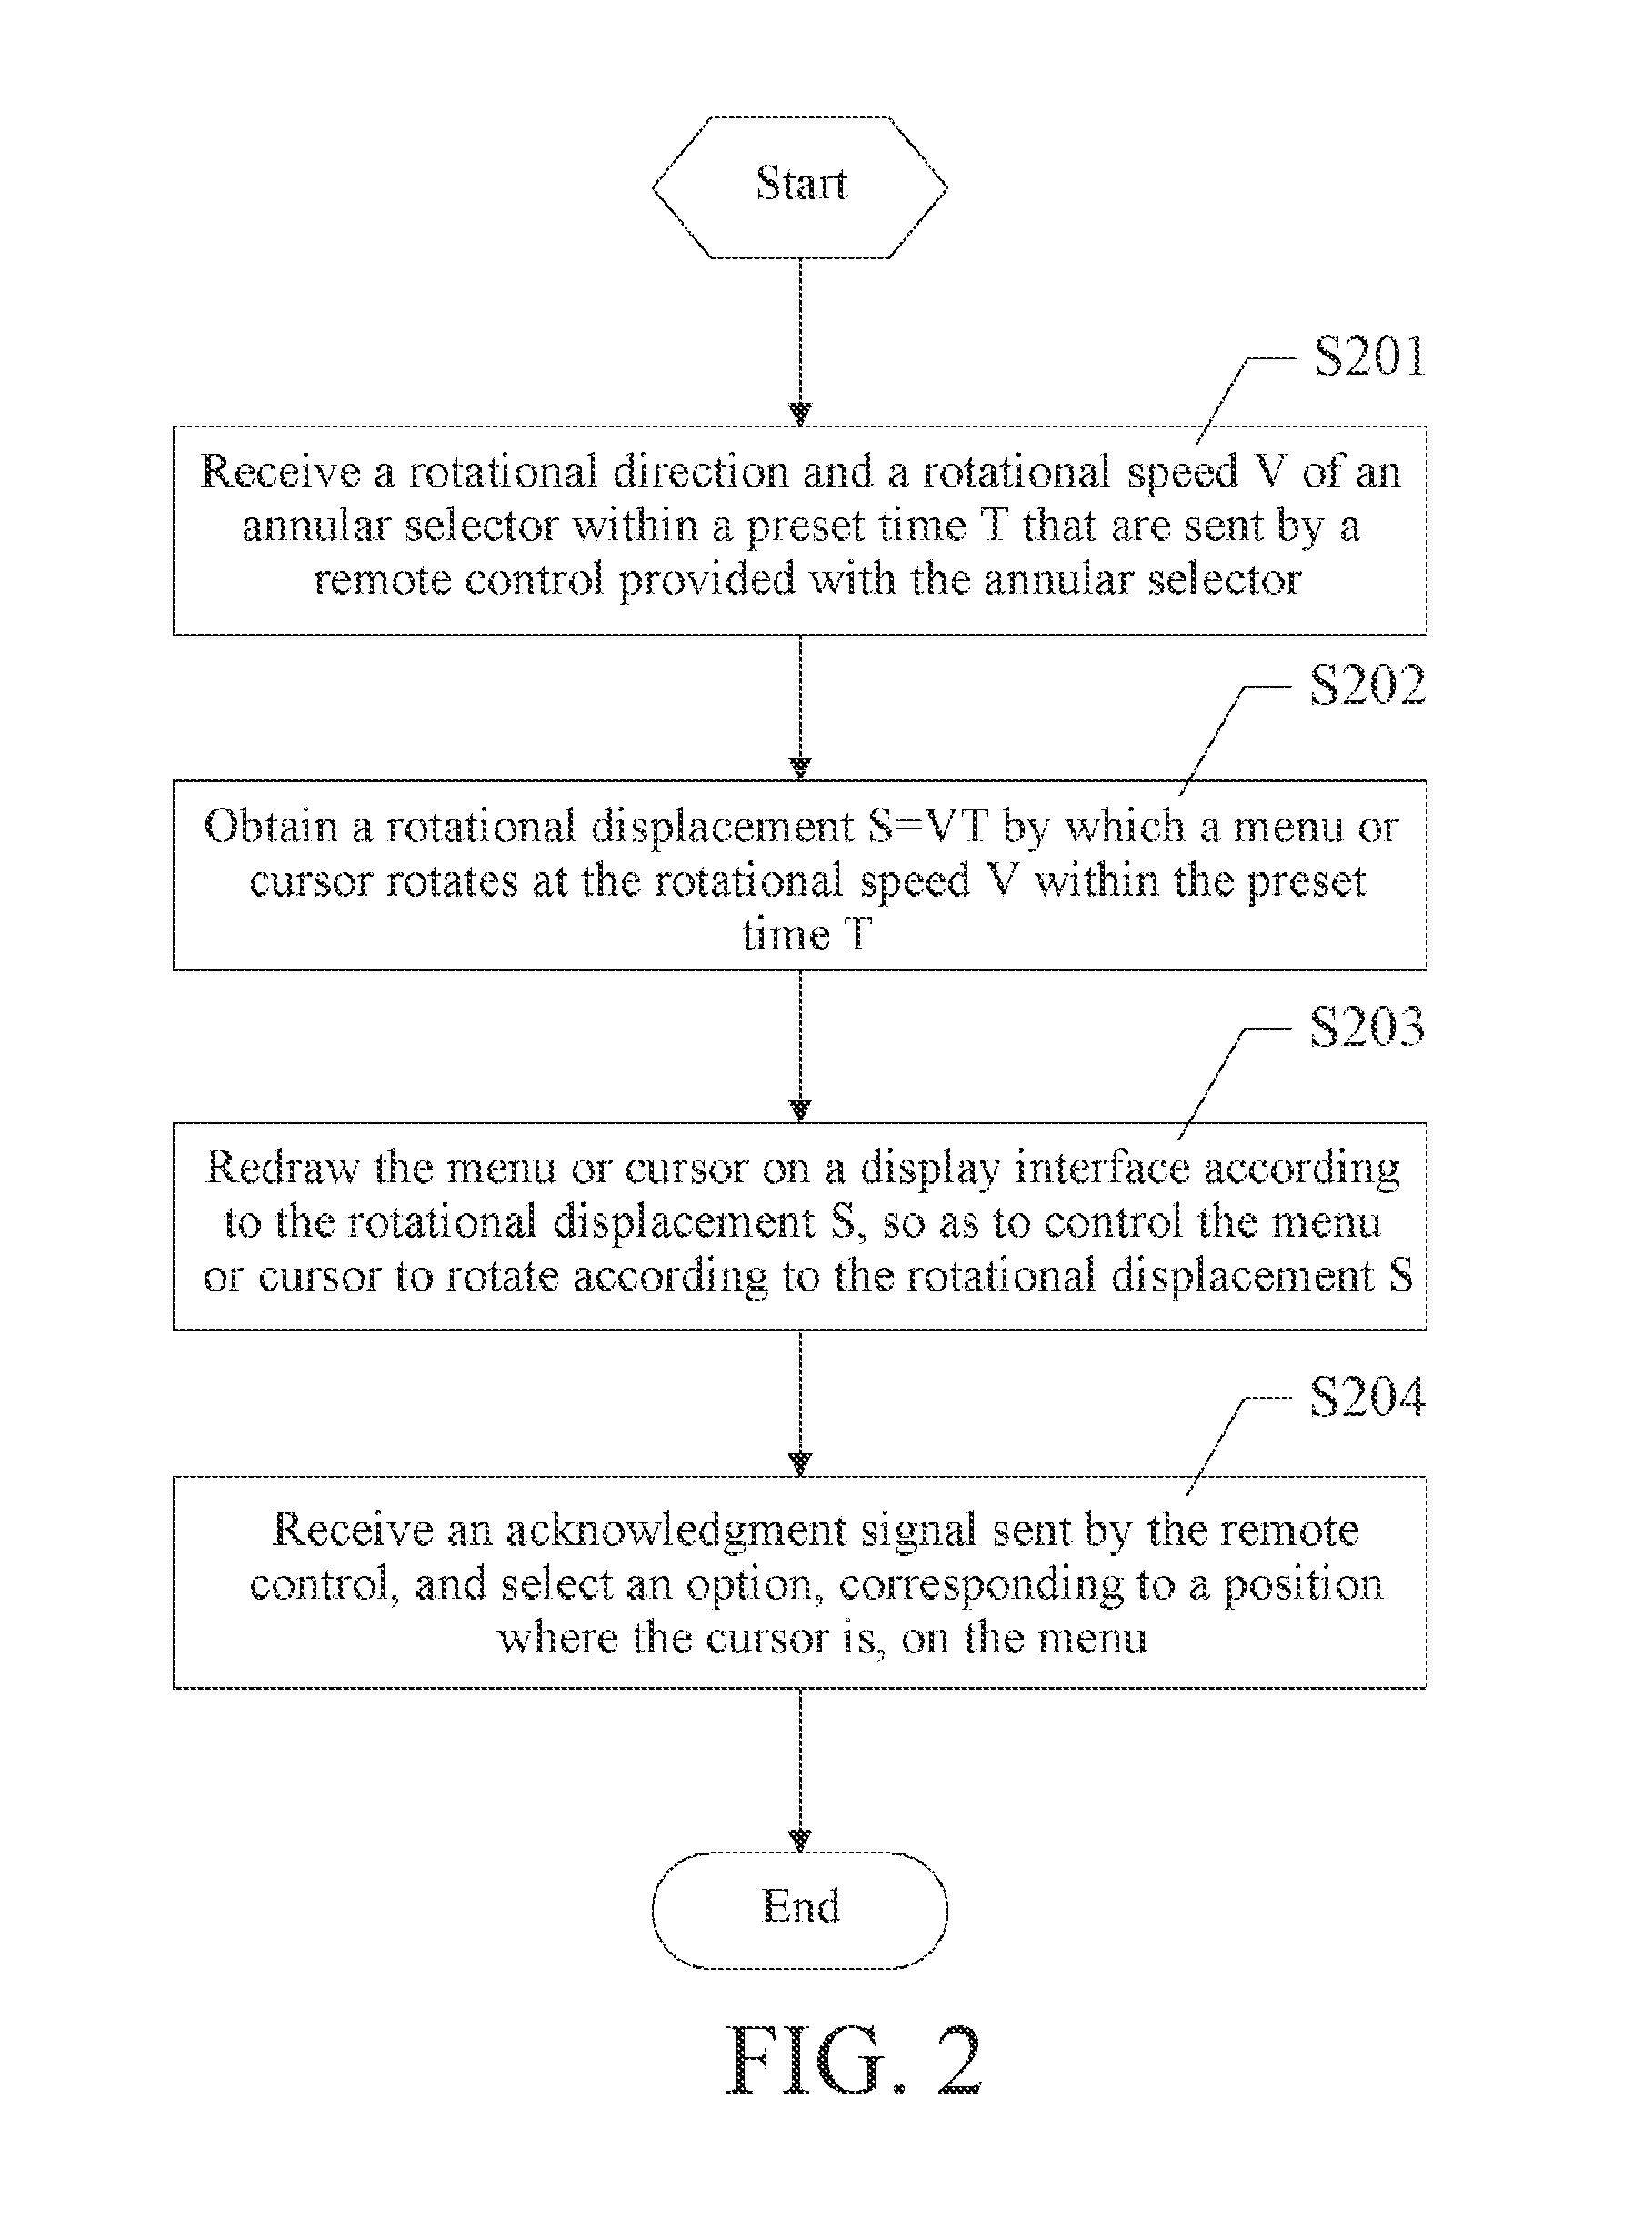 Method, apparatus and remote control for annular-selector based television interaction